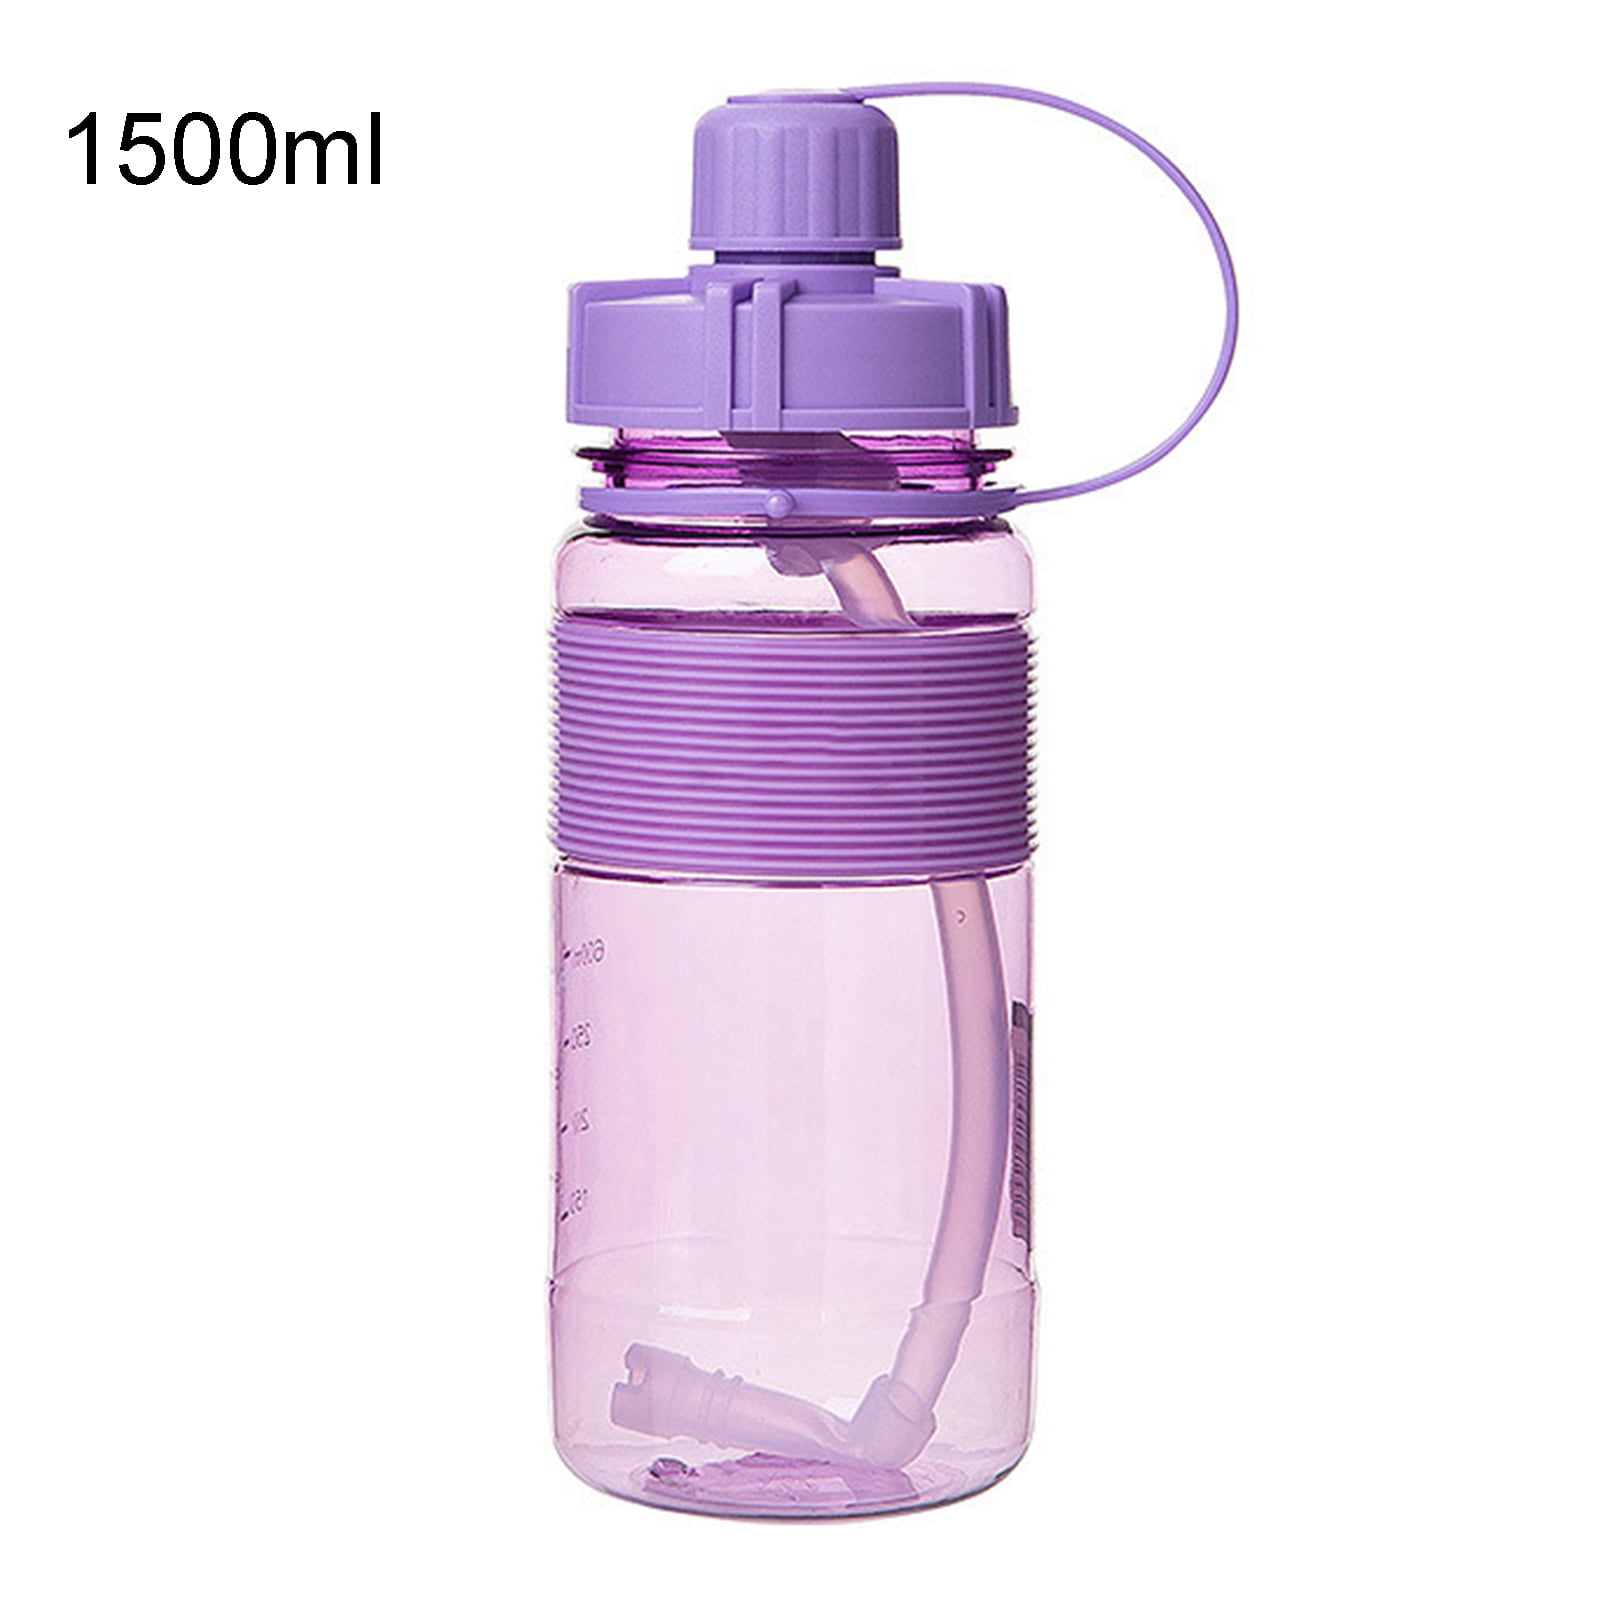 Details about   1500ML Sports Gym Fitness Tour Camping Hiking  Anti fall Leak Proof Water Bottle 